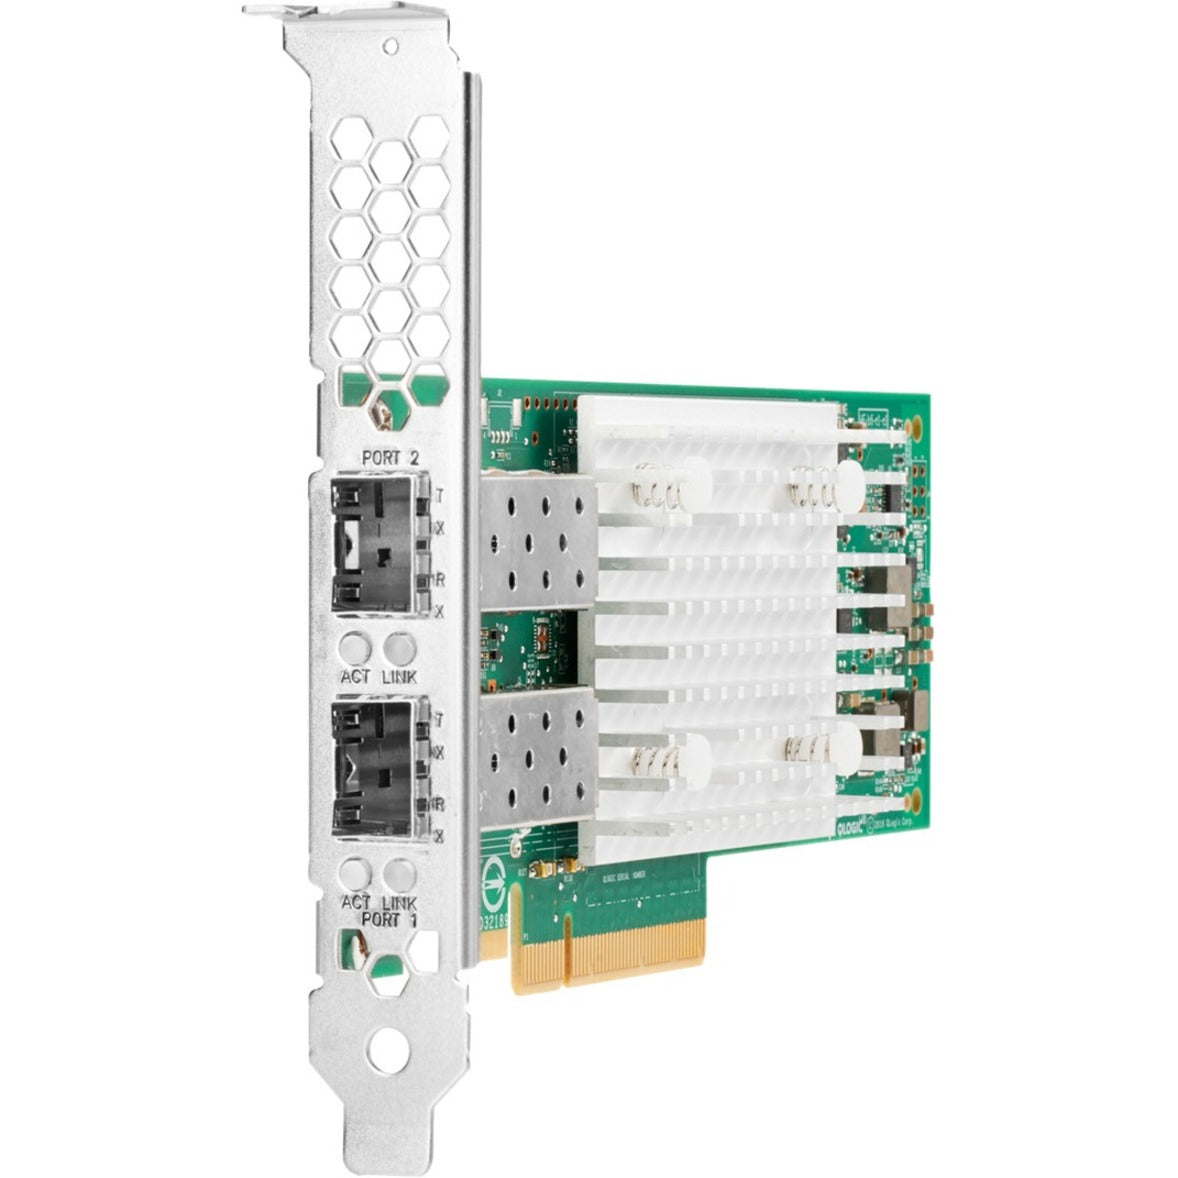 HPE P08443-B21 25Gigabit Ethernet Card, High-Speed Networking Solution